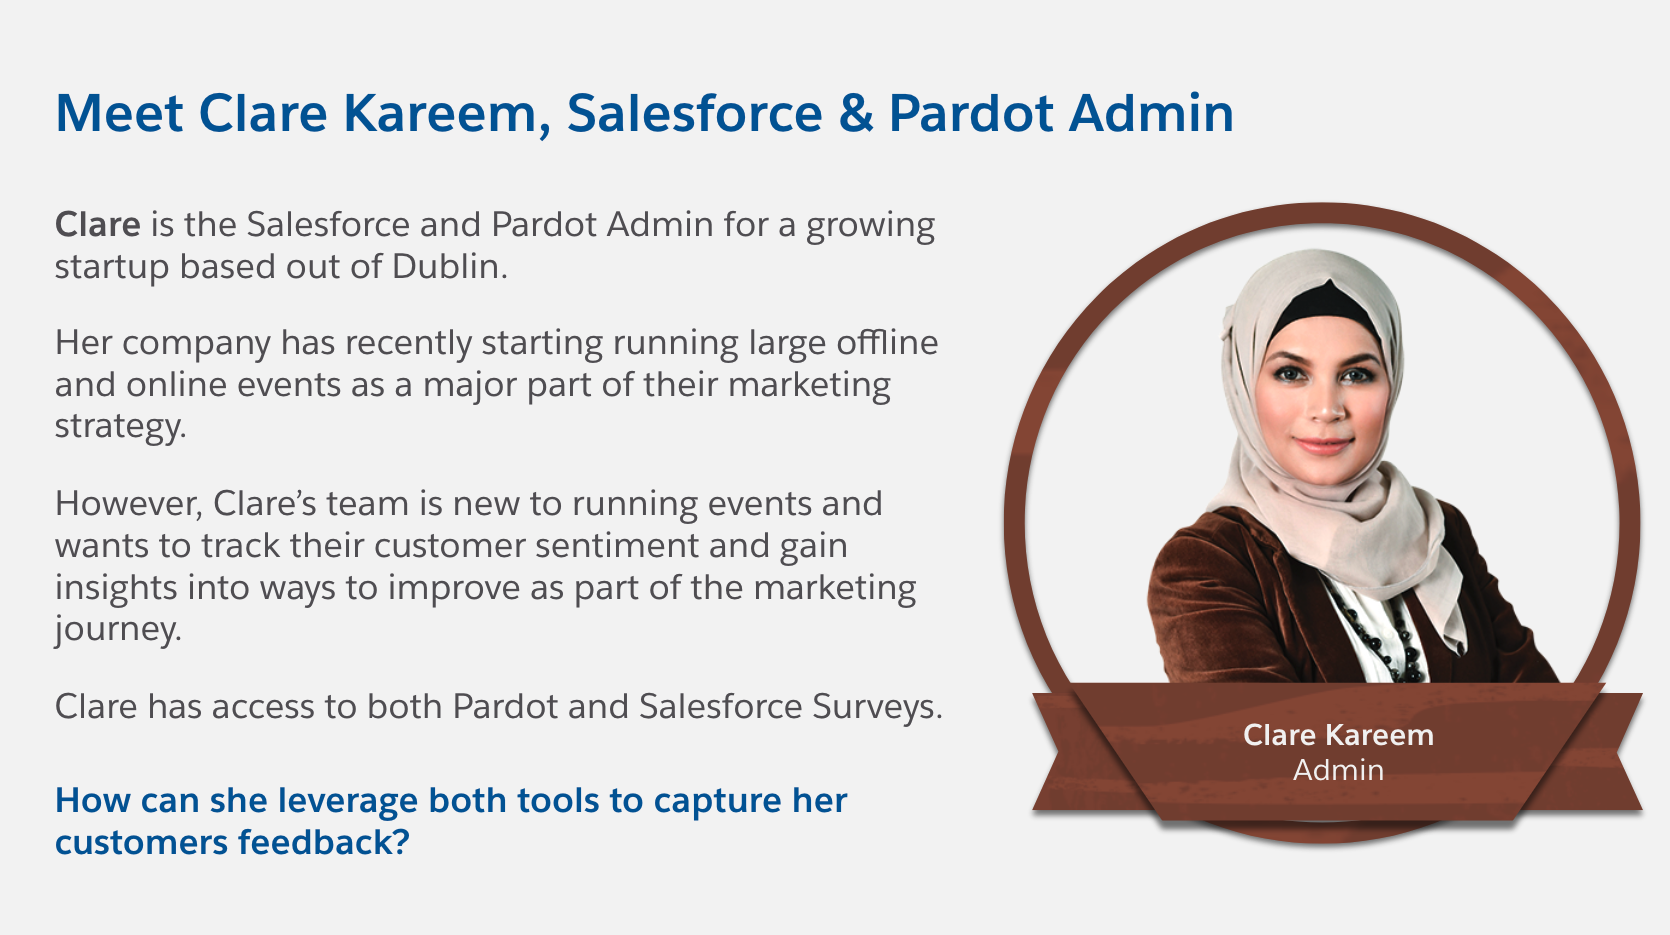 Hayley R. - Salesforce Marketing Cloud Account Engagement Consultant (pka  Pardot) - OUT IN THE CLOUDS